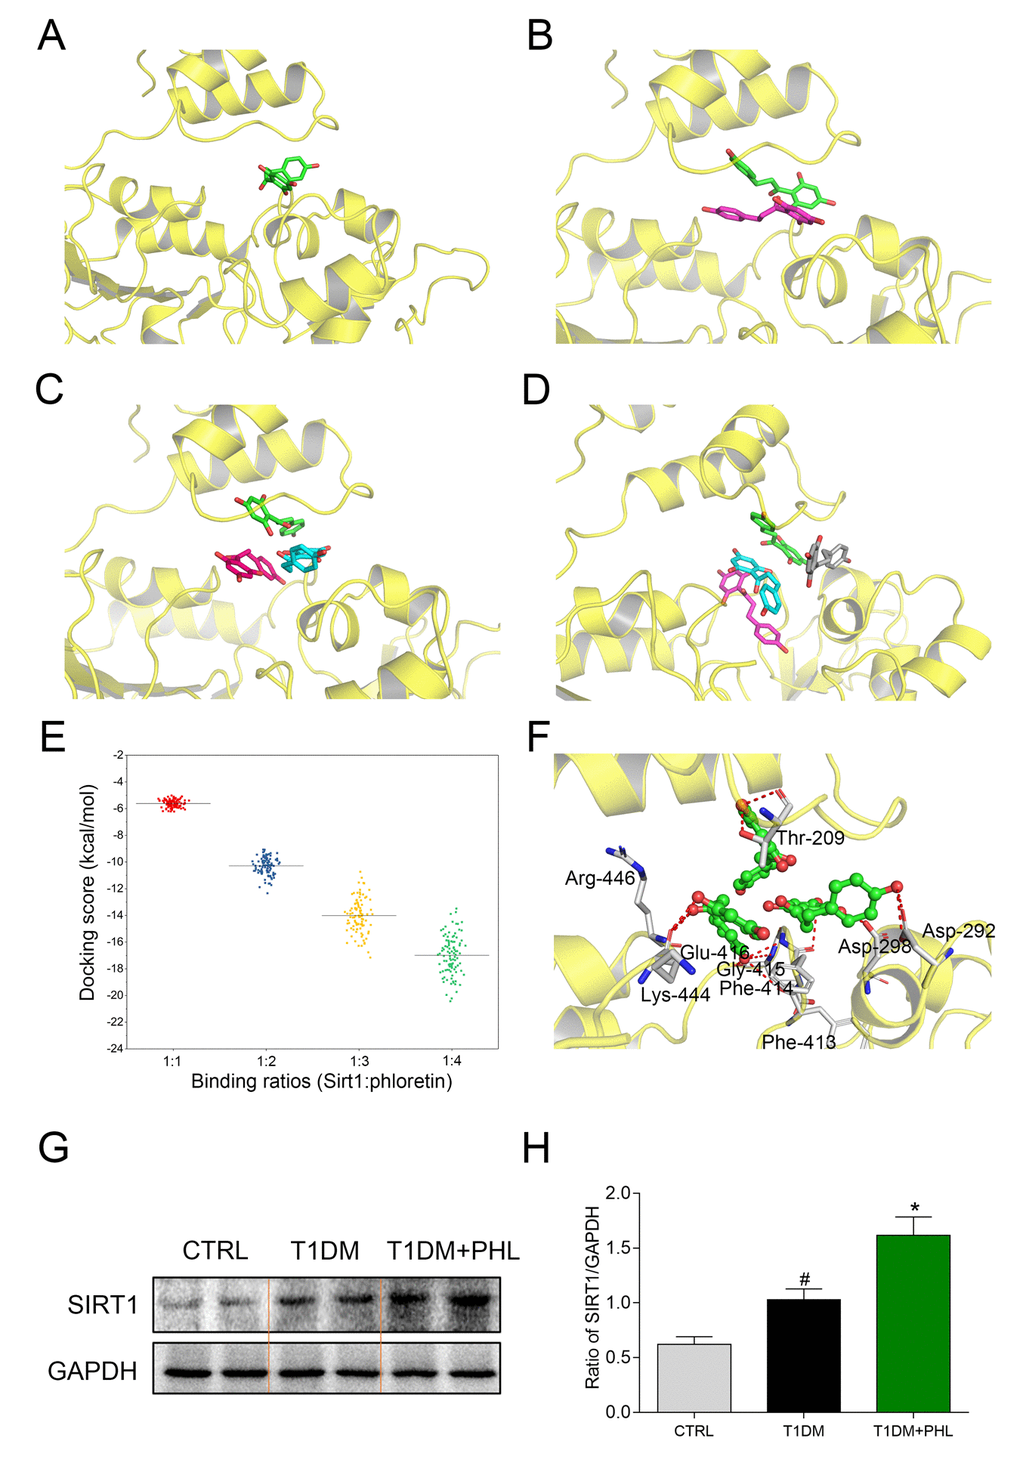 Molecular docking analysis of PHL within binding site of SIRT1 at SIRT1: PHL binding ratios of 1:1, 1:2, 1:3, and 1:4. (A) 1:1; (B) 1:2; (C) 1:3; (D) 1:4; (E) The distribution of 100 conformational scores for each ratio; (F) The detailed view of SIRT1: PHL with the binding ratio of 1:3. (G-H) Total proteins (100 μg) were extracted from the cardiac tissues in CTRL, T1DM and T1DM+PHL group. The expression level of SIRT1 in total protein was examined by western blot, with GAPDH as a loading control. Data are presented as means ± SEM. *P #P 